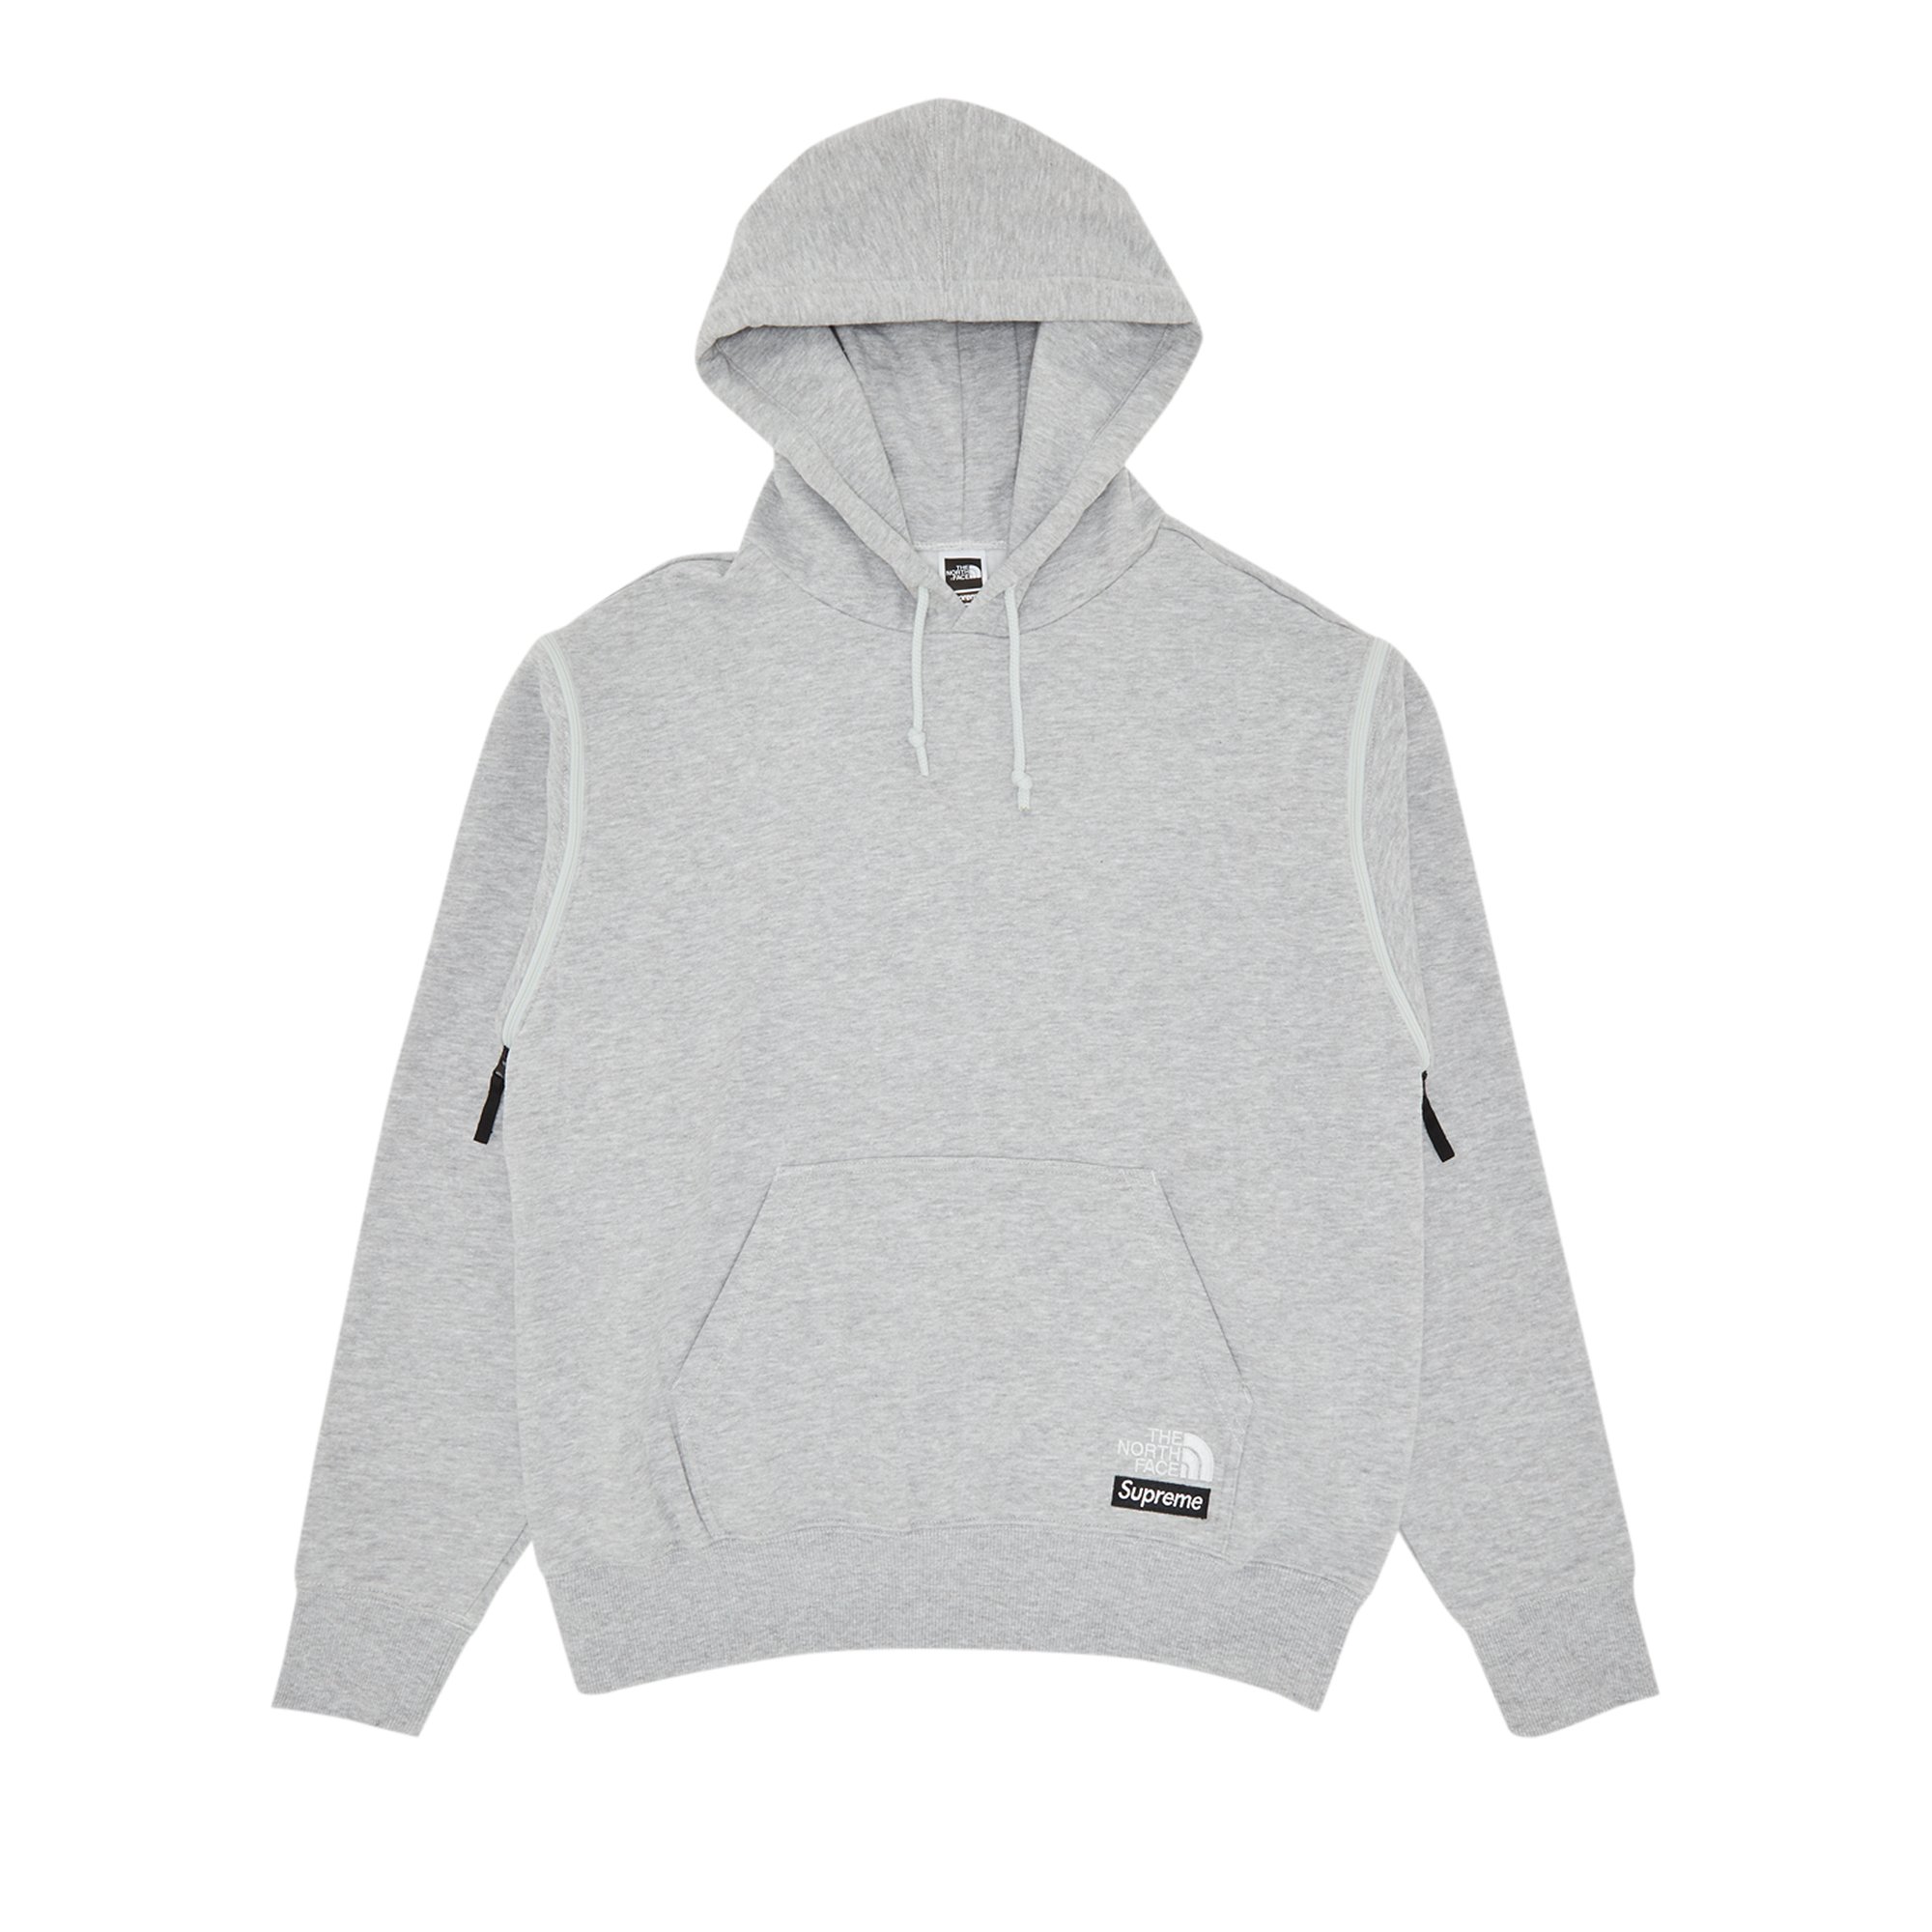 Buy Supreme x The North Face Convertible Hooded Sweatshirt